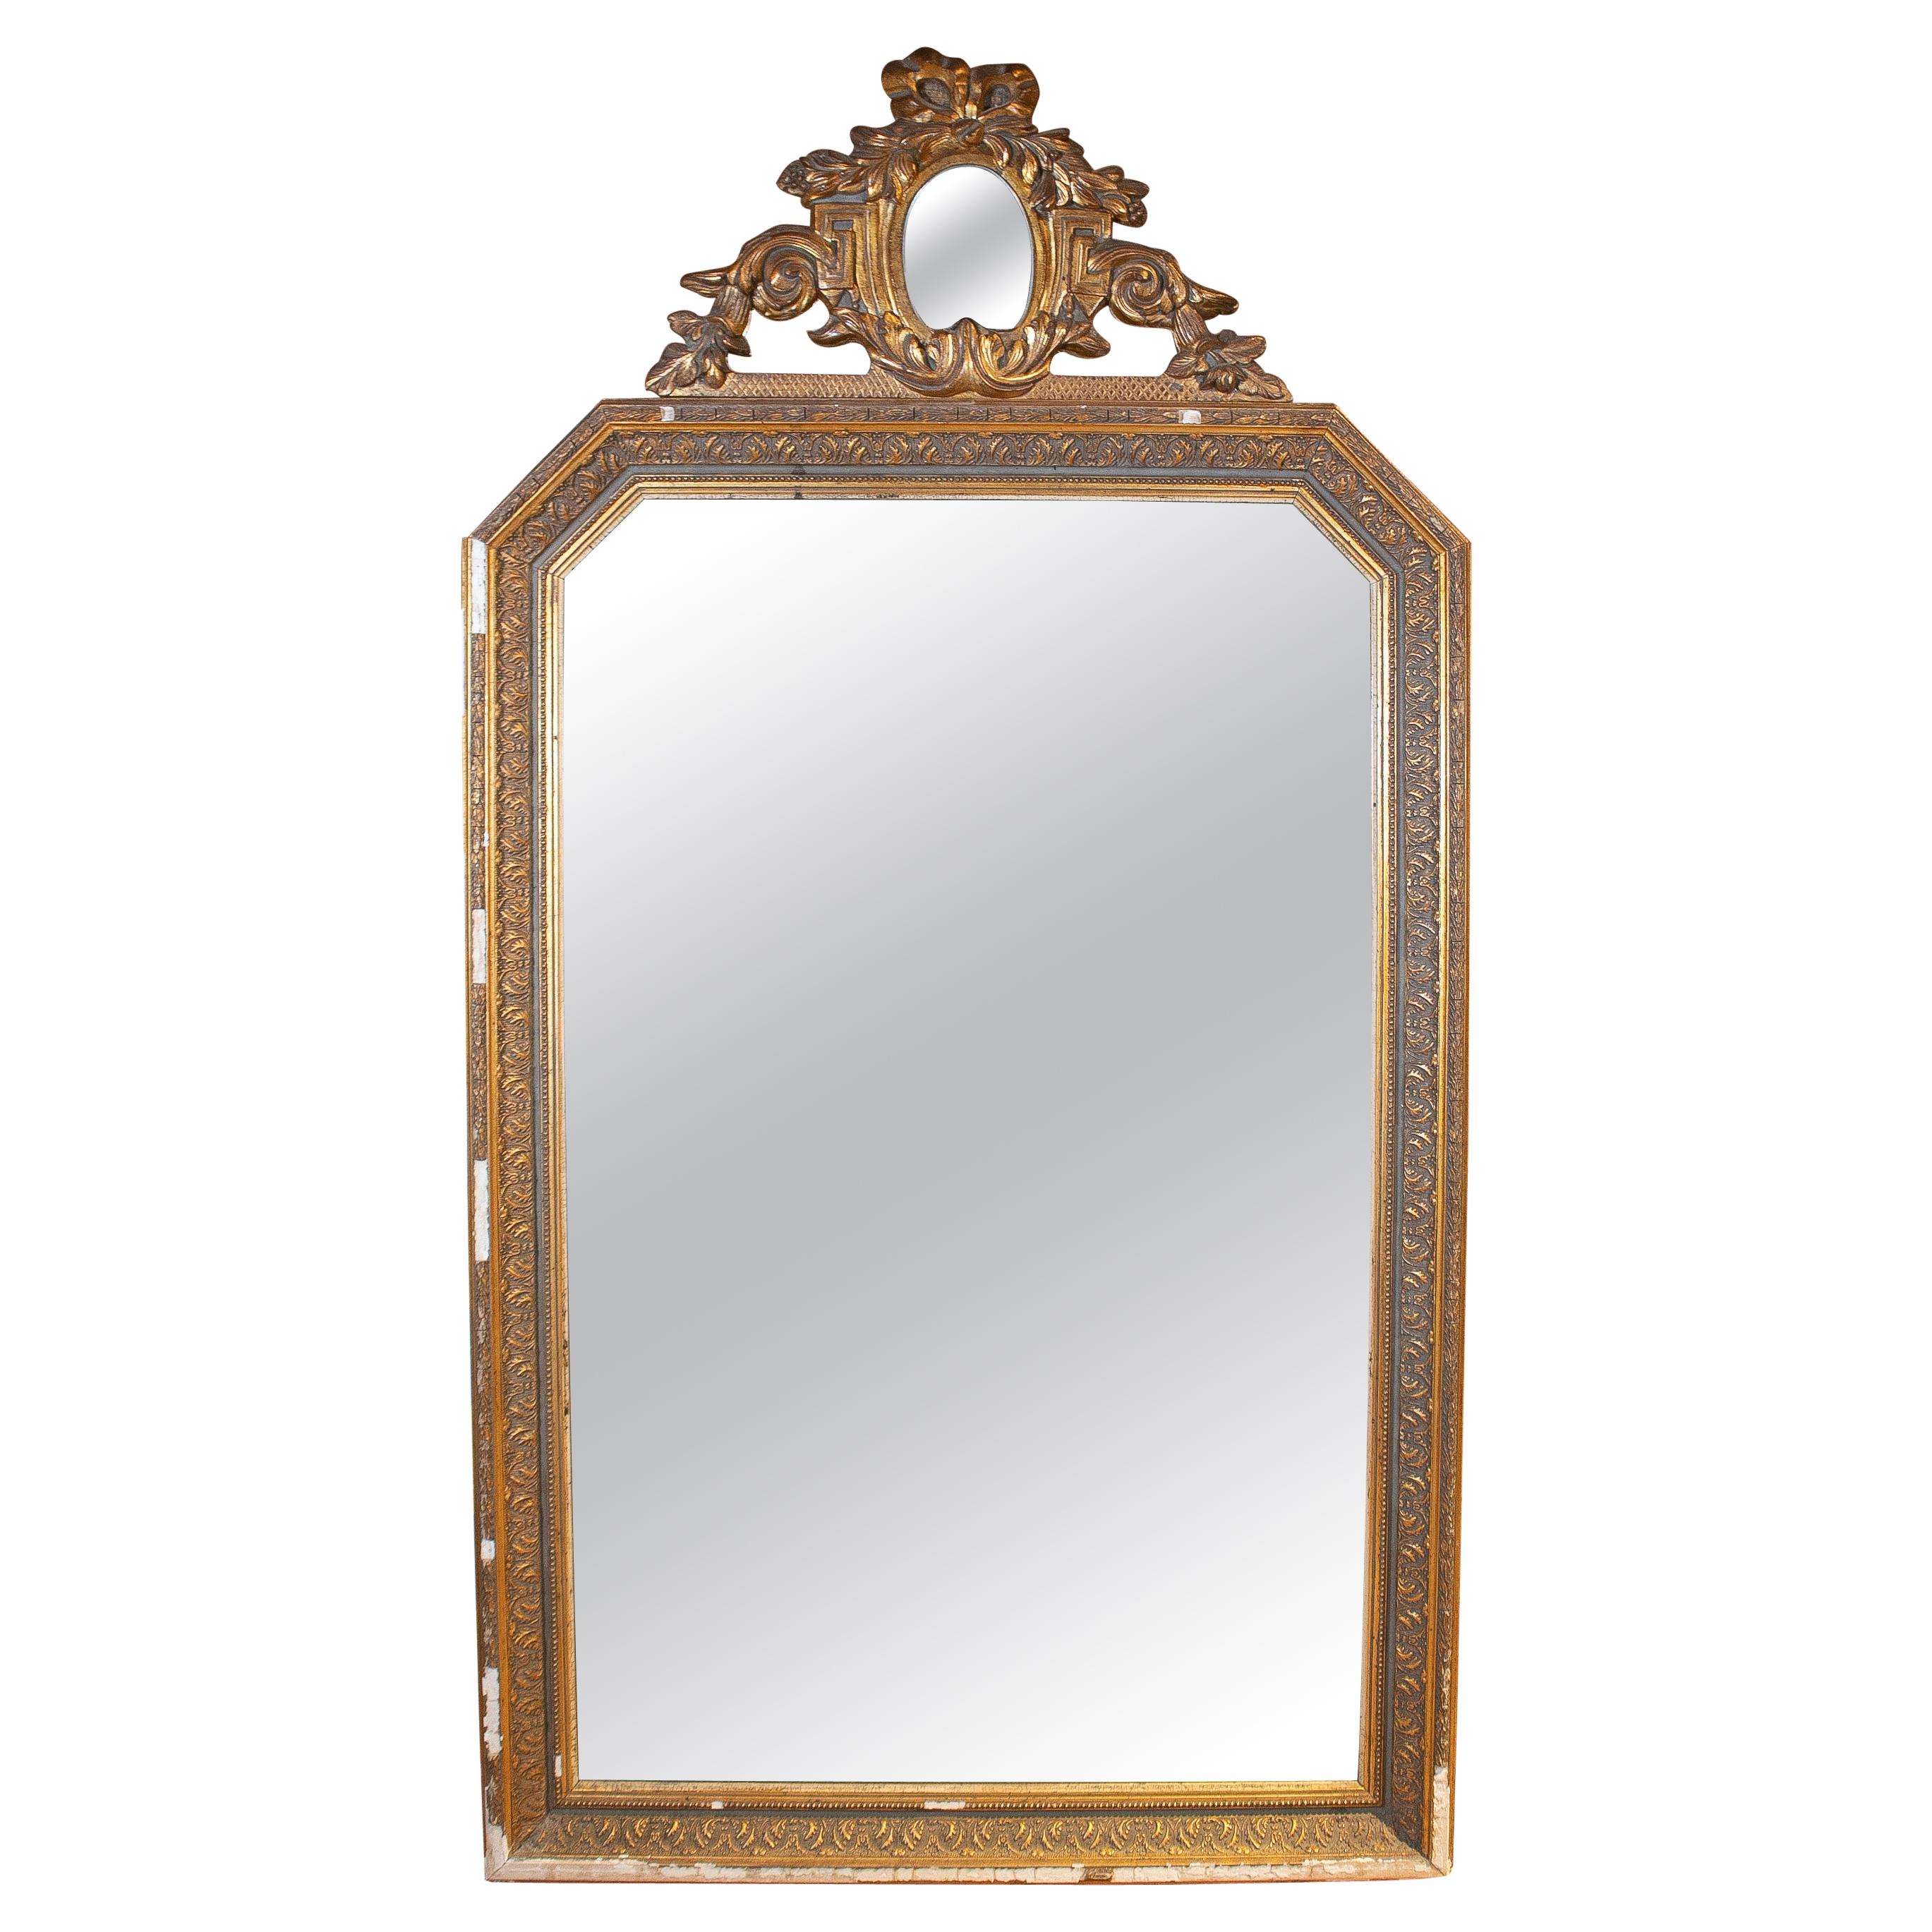 19th Century French Gold Gilt Classical Wall Mirror with Oval Mirror Atop